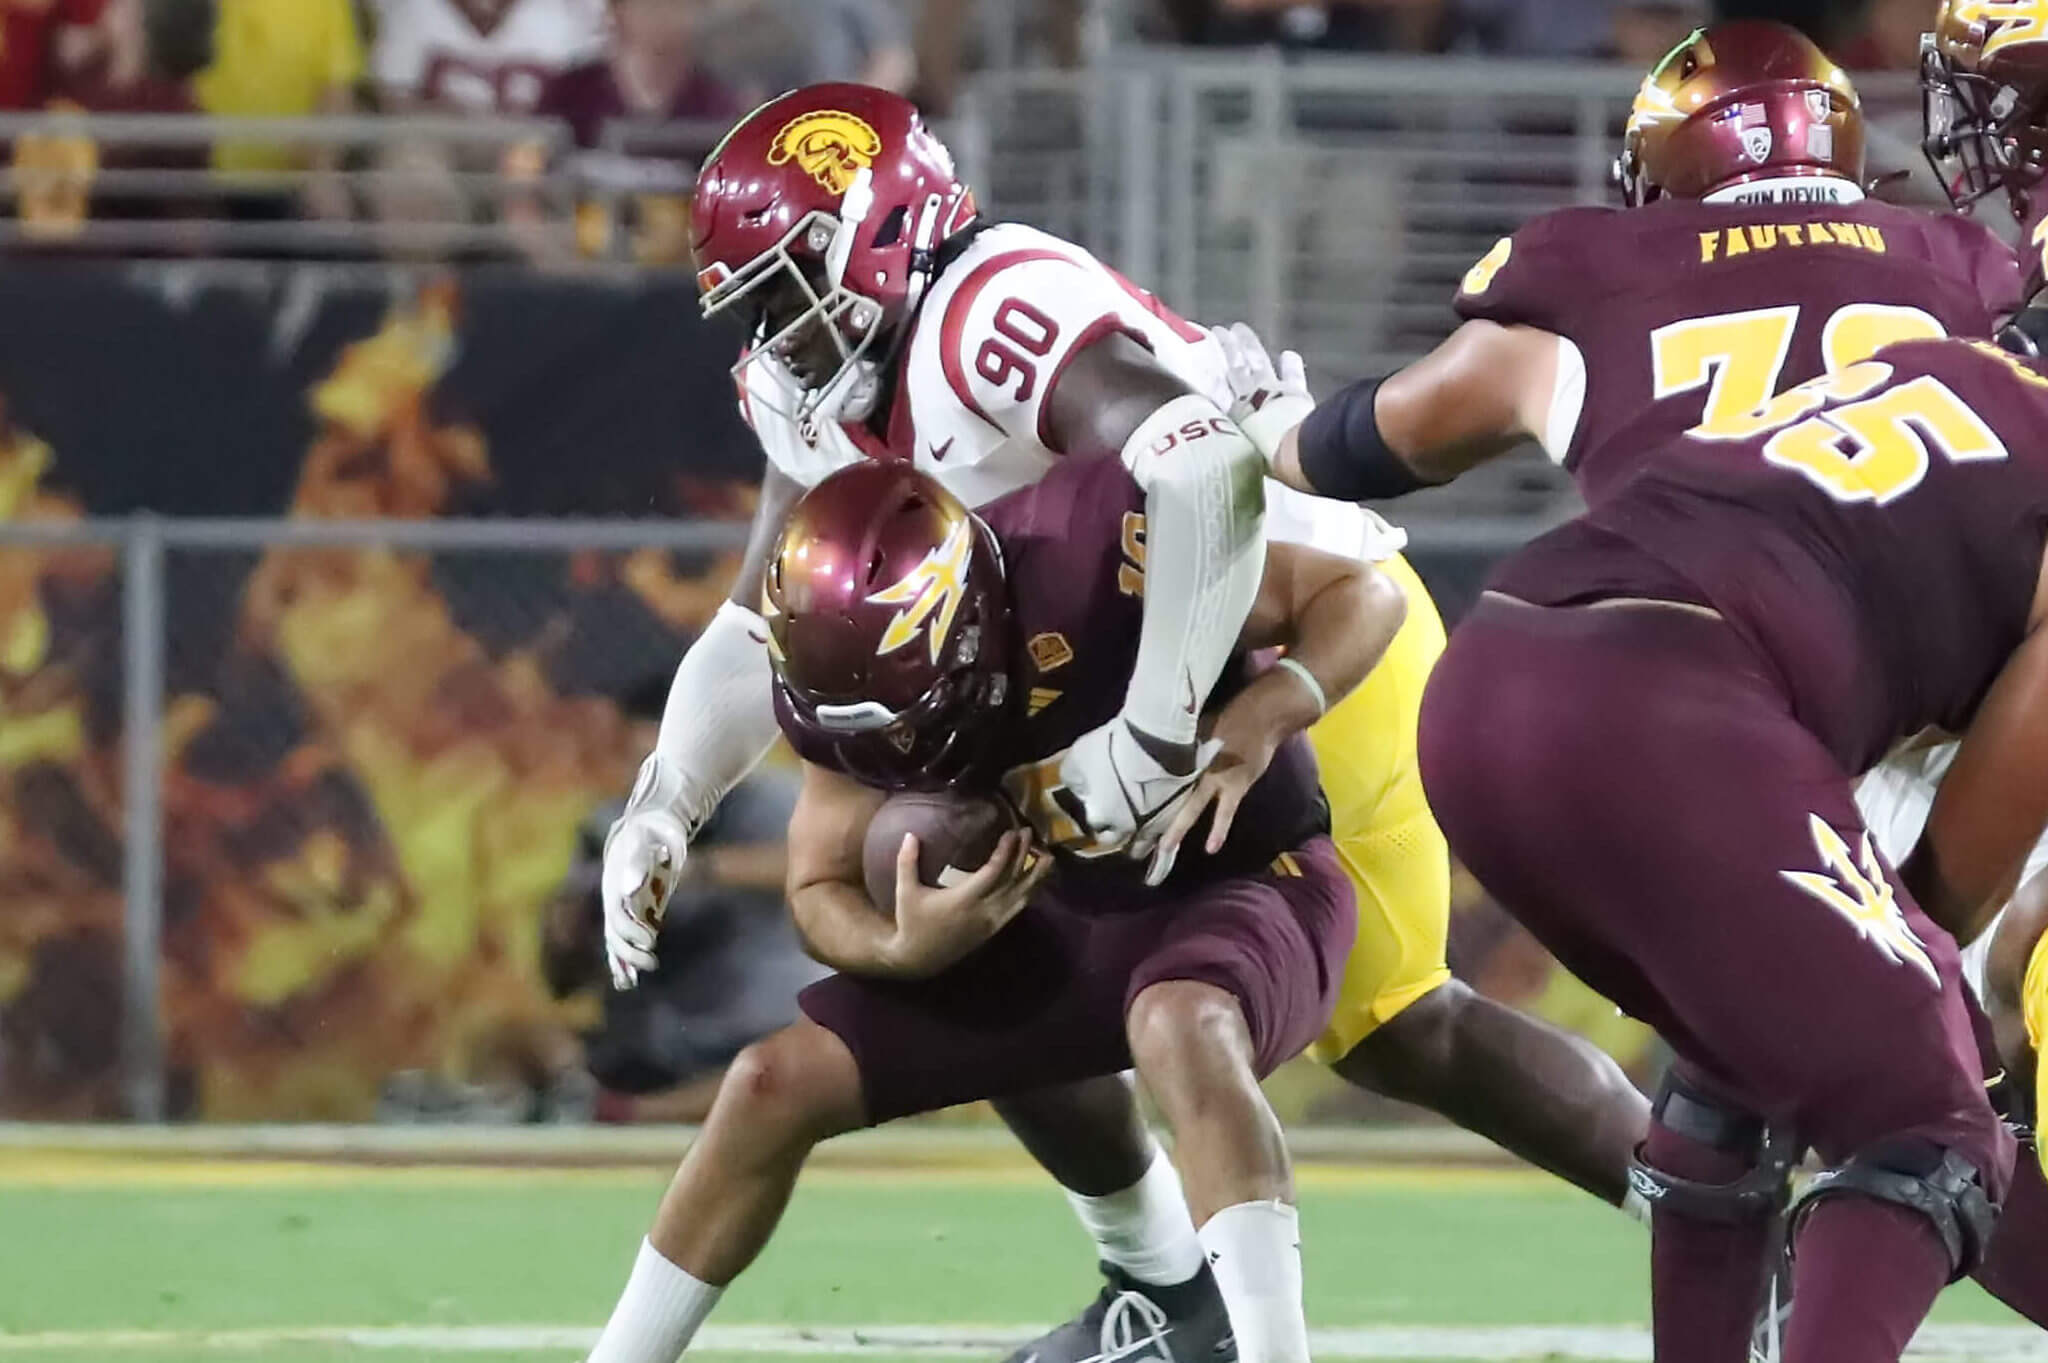 USC spring primer: 42 thoughts on the Trojans defense/special teams personnel